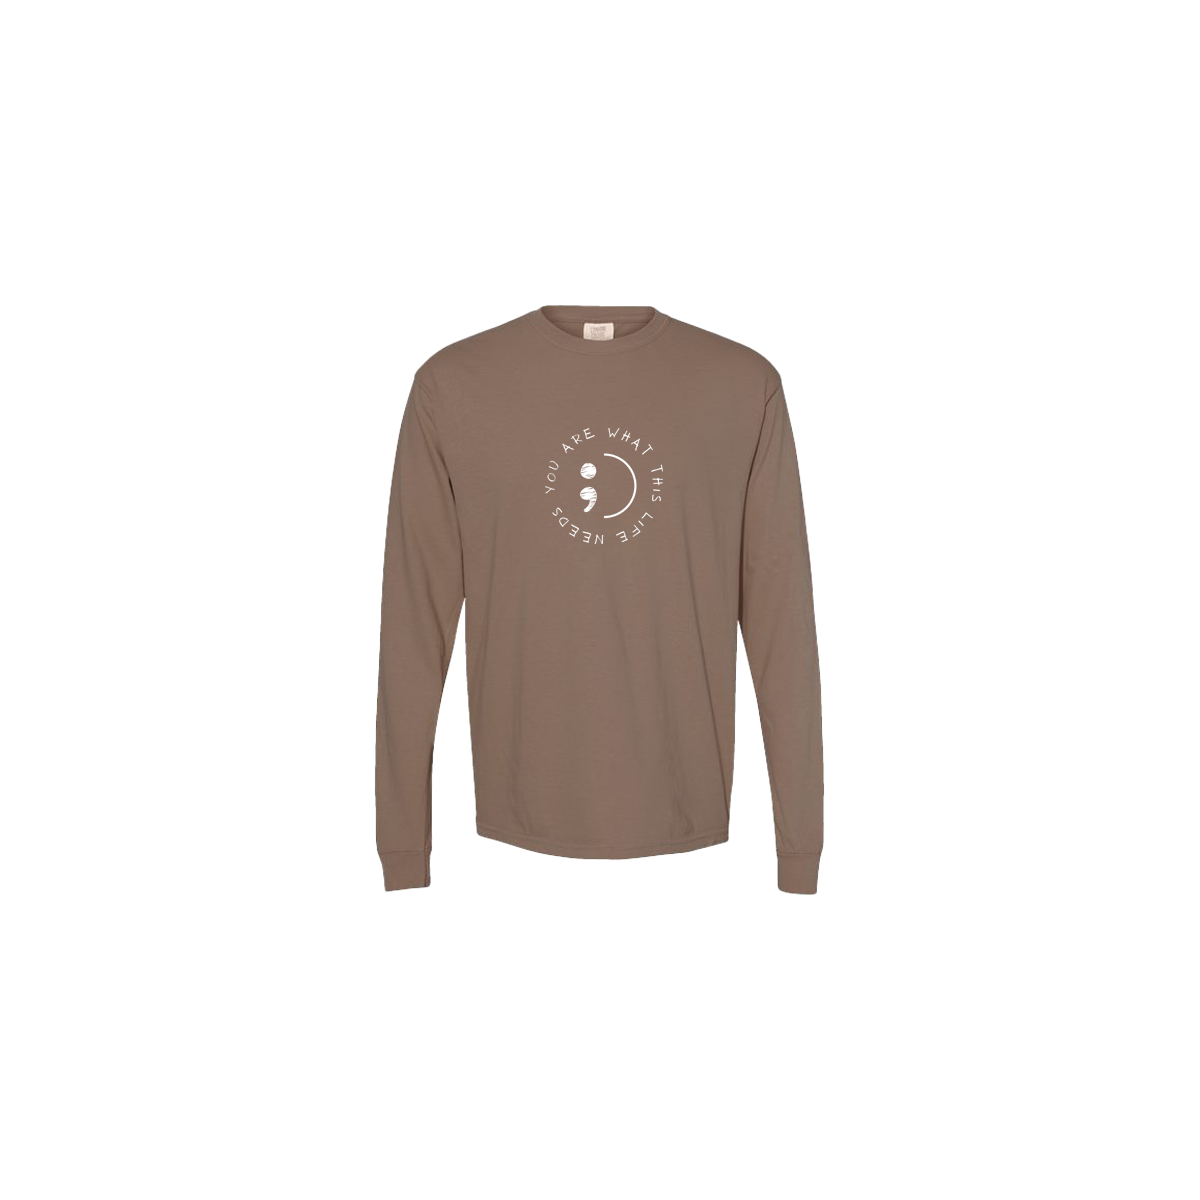 You Are What This Life Needs Embroidered Brown Long Sleeve Tshirt - Mental Health Awareness Clothing